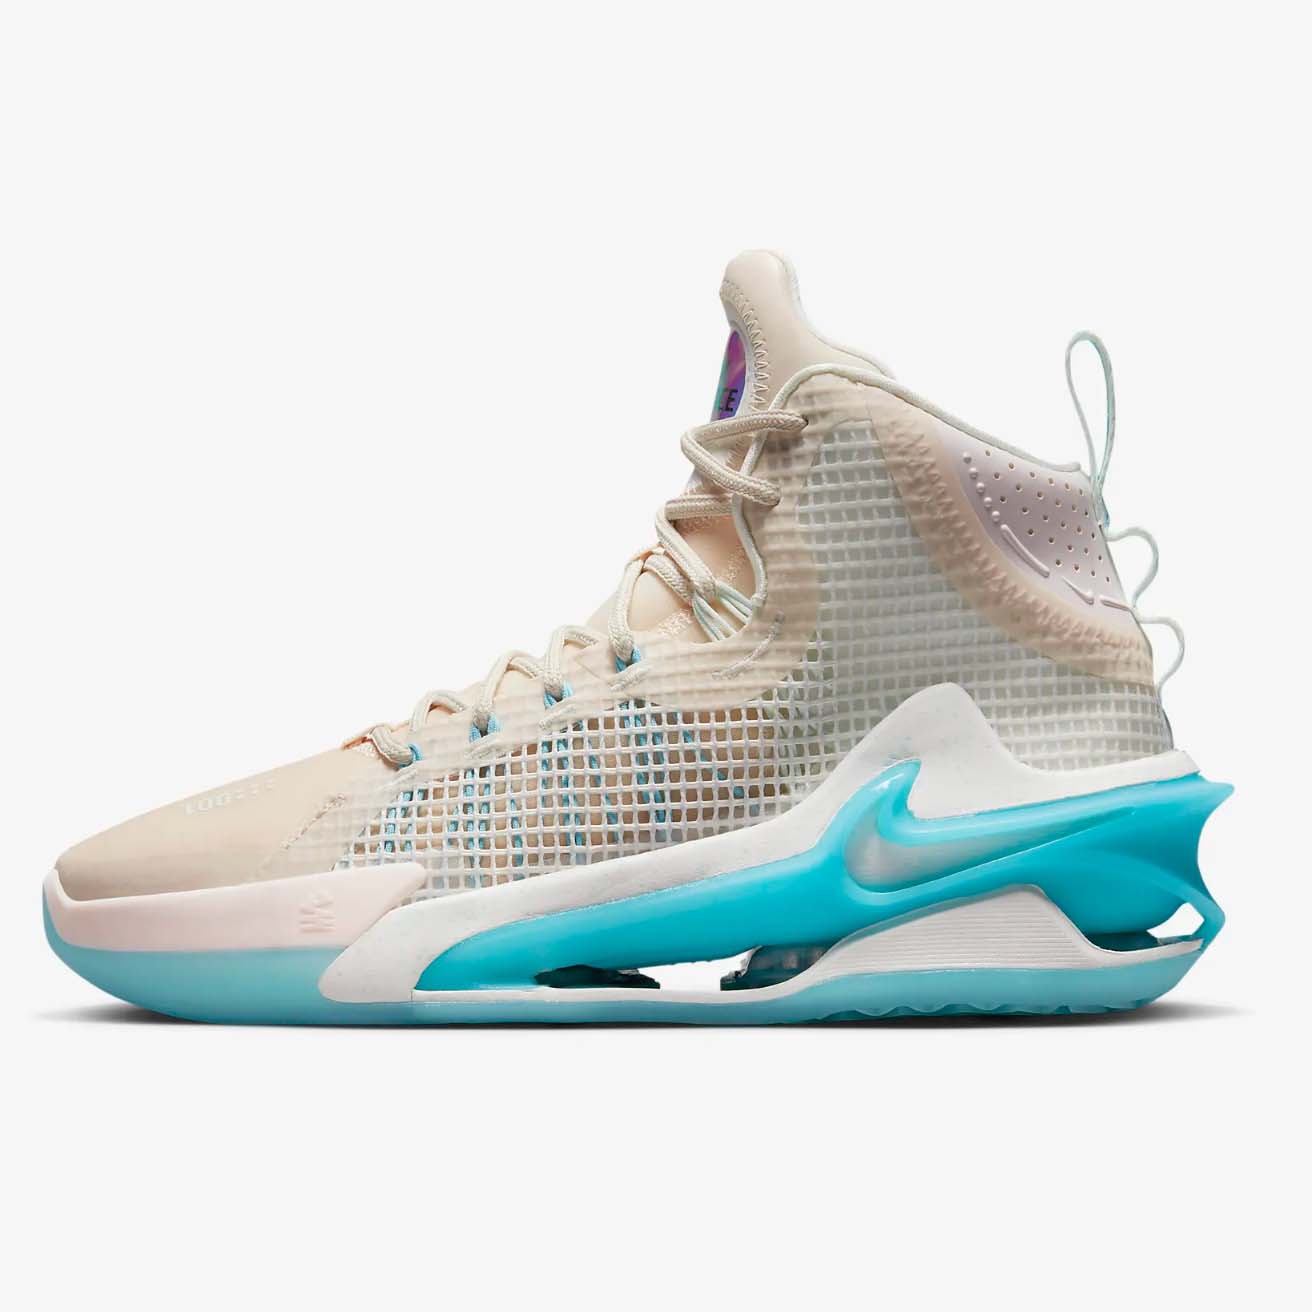 Nike Air Zoom G.T. Jump basketball shoes in blue and pearl white